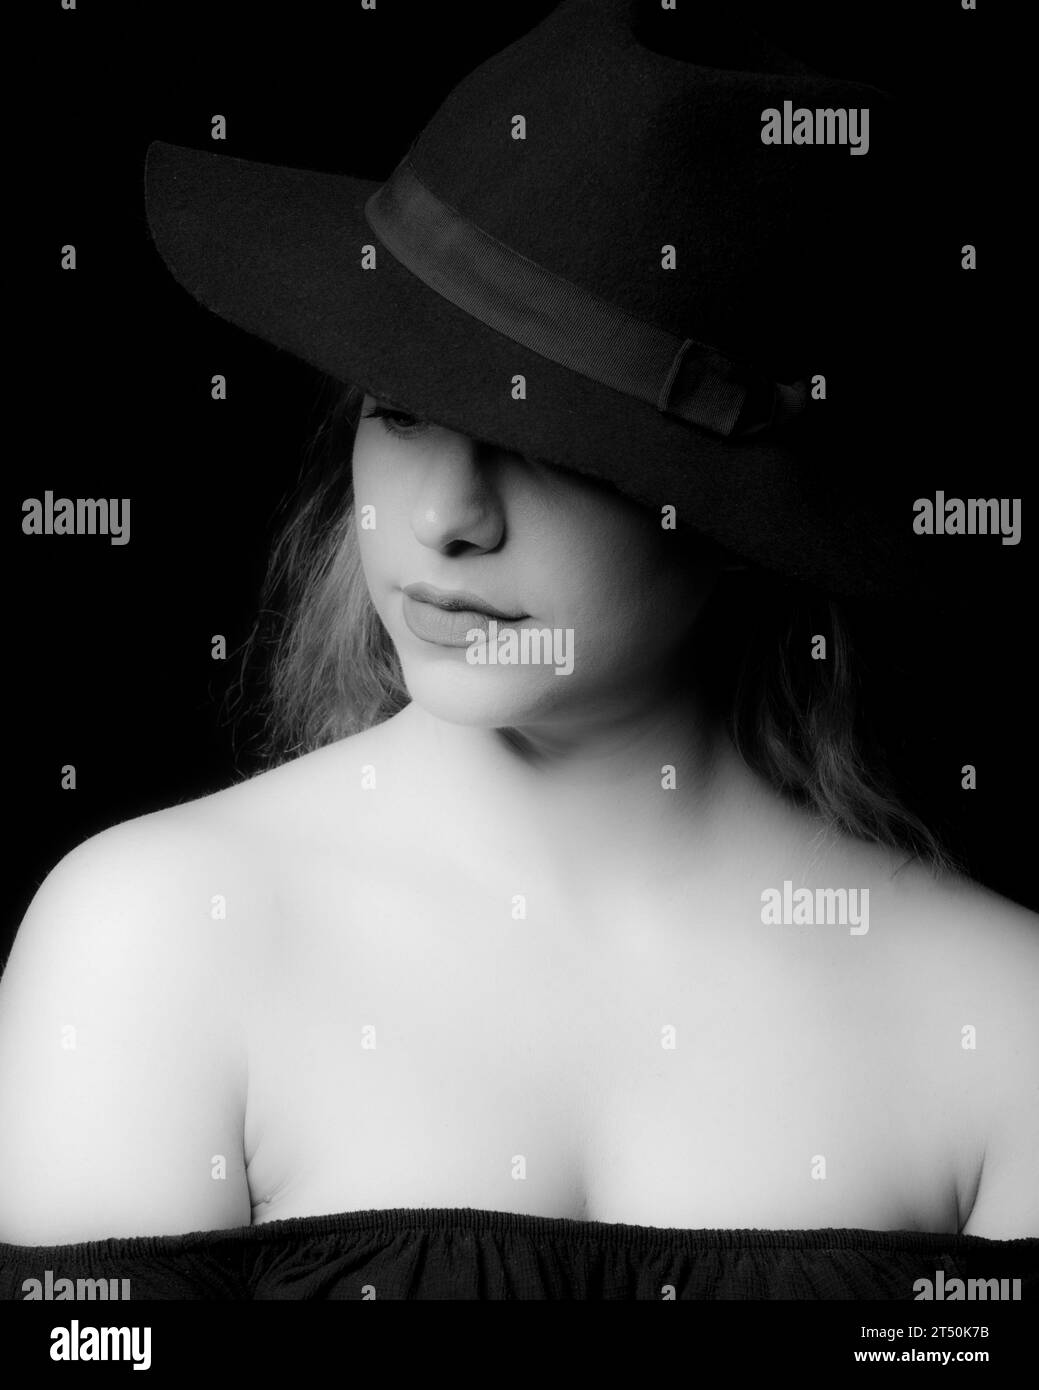 High contrast black and white portrait of an attractive woman wearing black hat Stock Photo